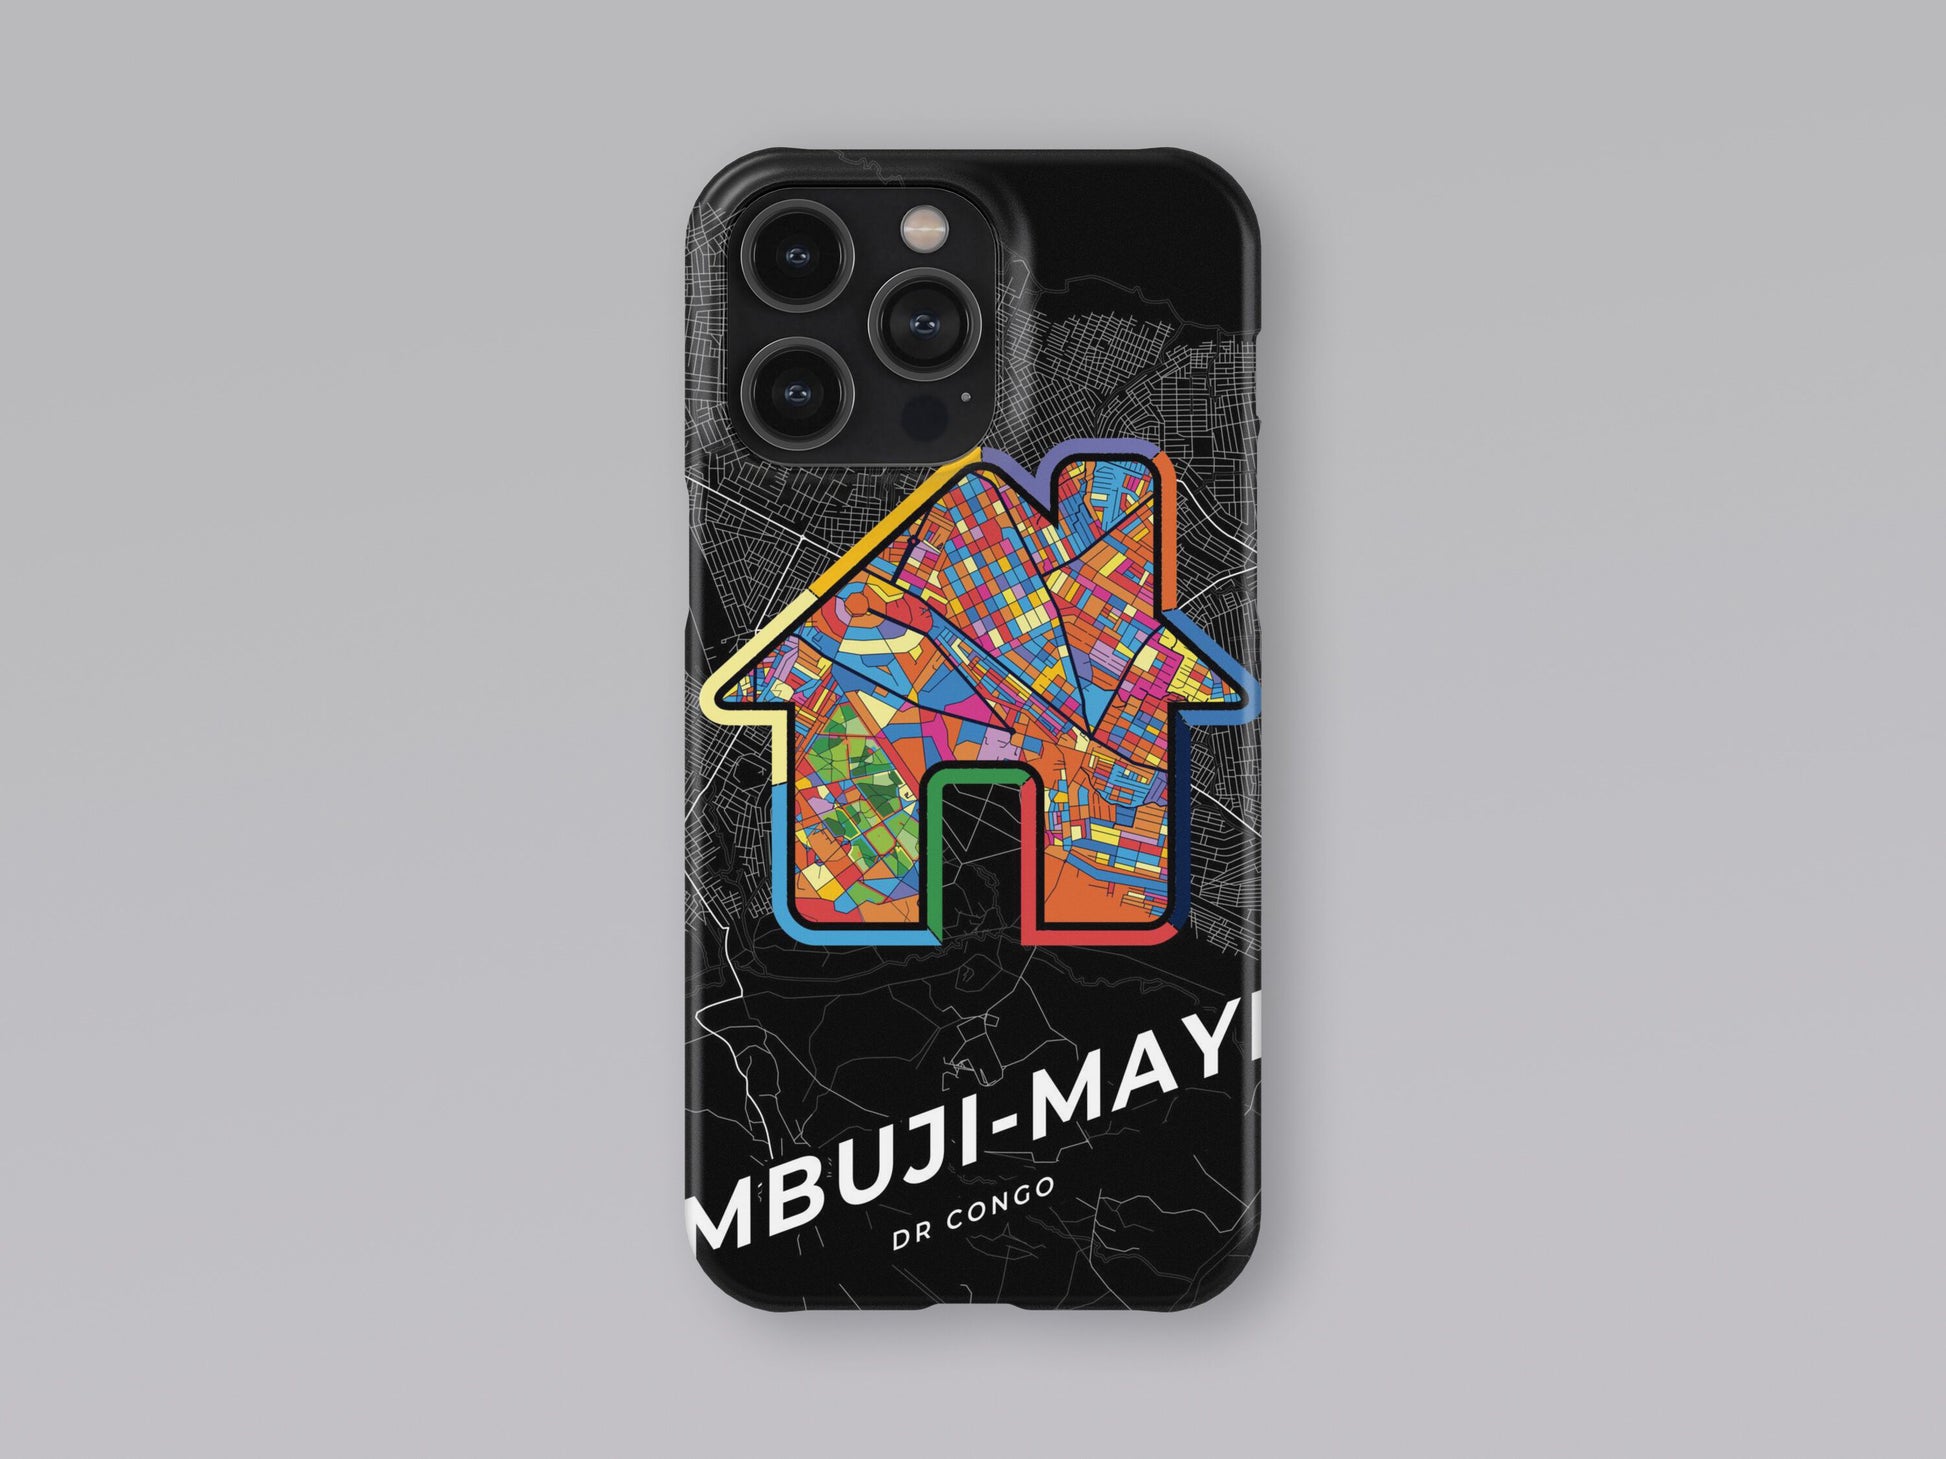 Mbuji-Mayi Dr Congo slim phone case with colorful icon. Birthday, wedding or housewarming gift. Couple match cases. 3